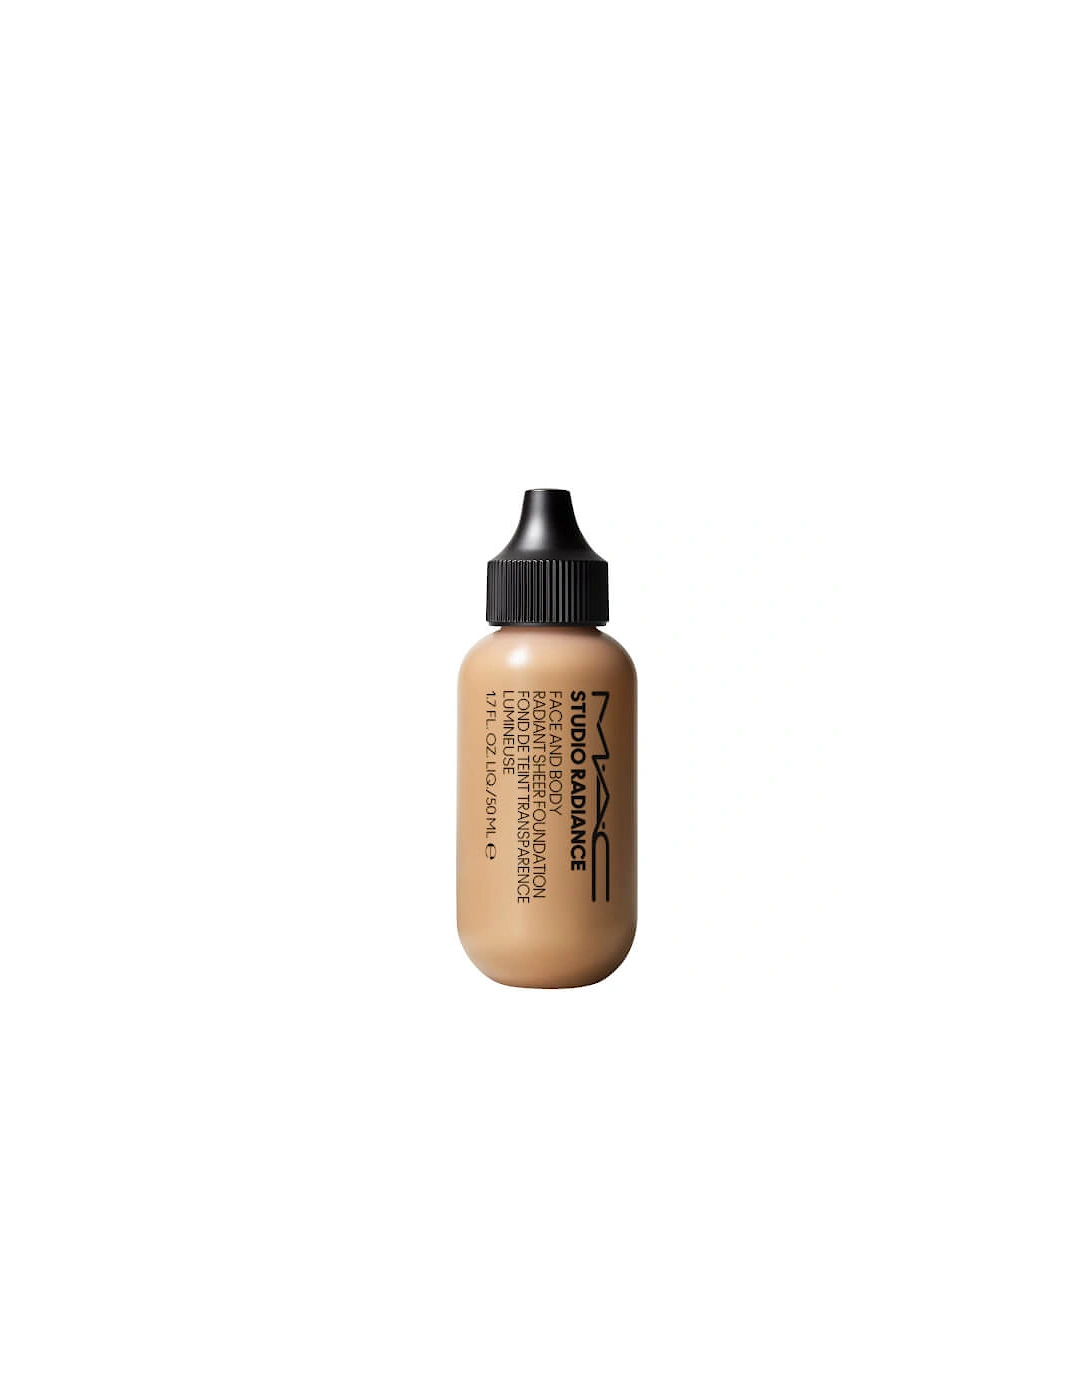 Studio Face and Body Radiant Sheer Foundation - C2, 2 of 1